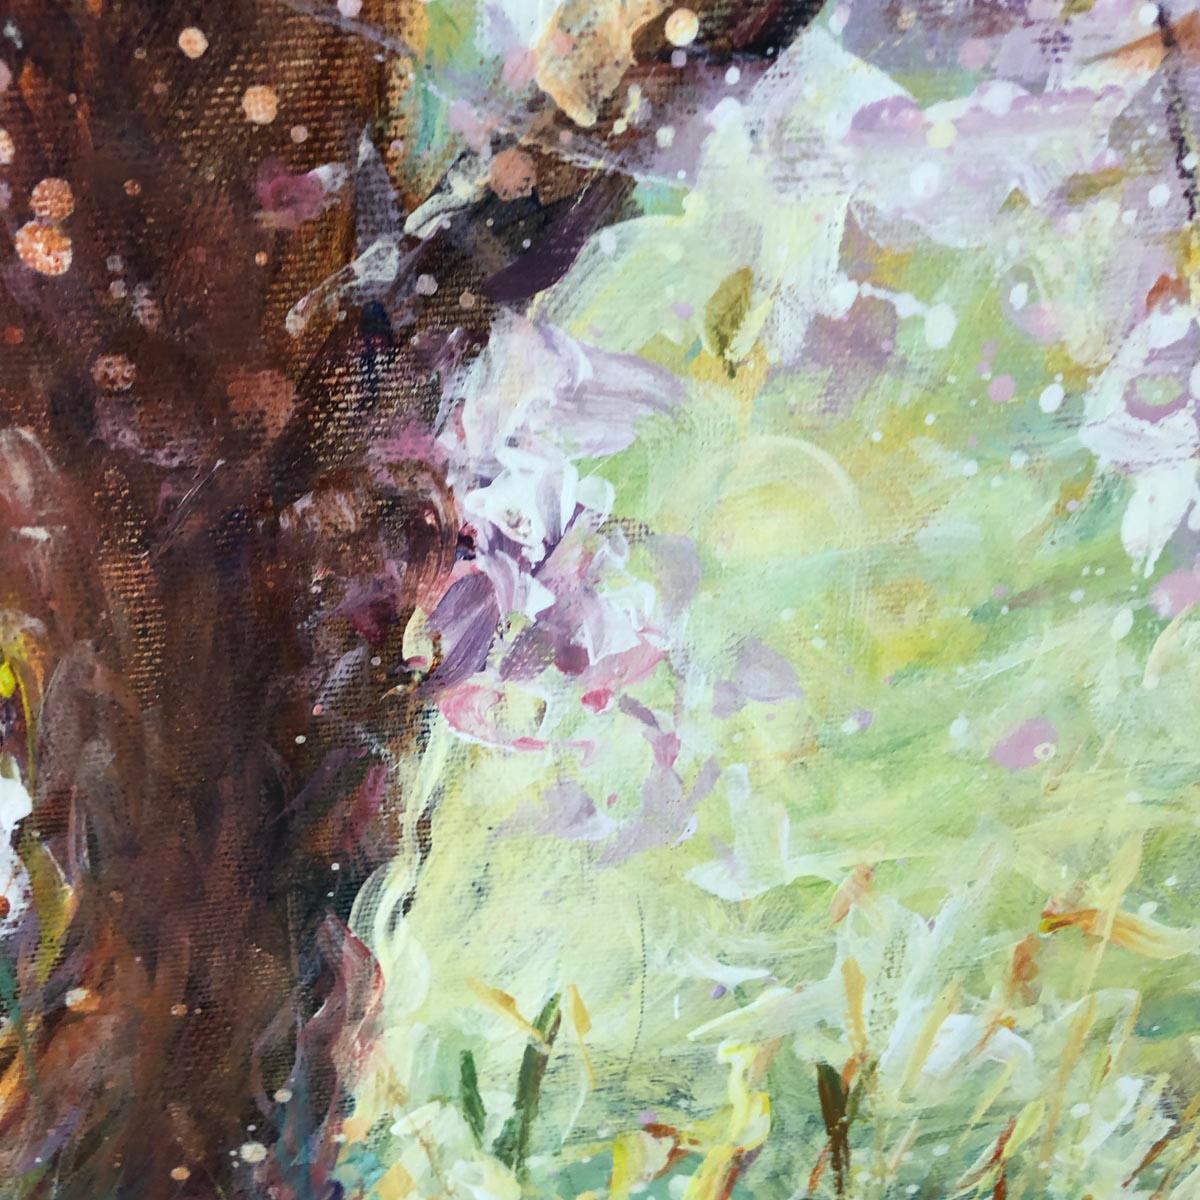 Cherry Blossom Tree, Landscape Painting, Contemporary art, impressionist style 5